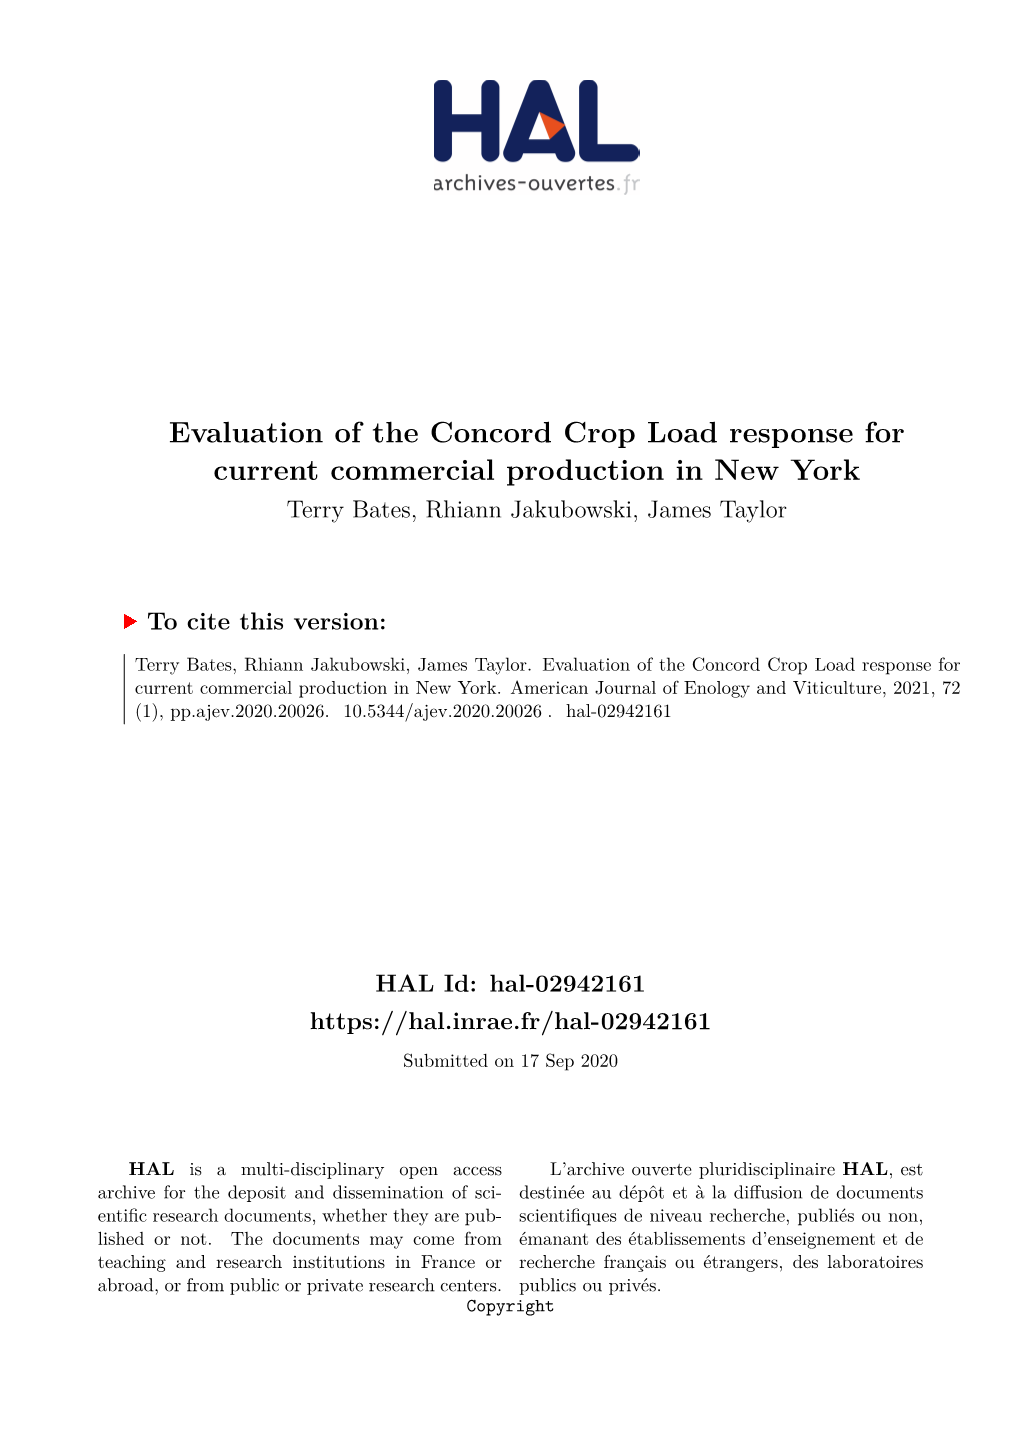 Evaluation of the Concord Crop Load Response for Current Commercial Production in New York Terry Bates, Rhiann Jakubowski, James Taylor